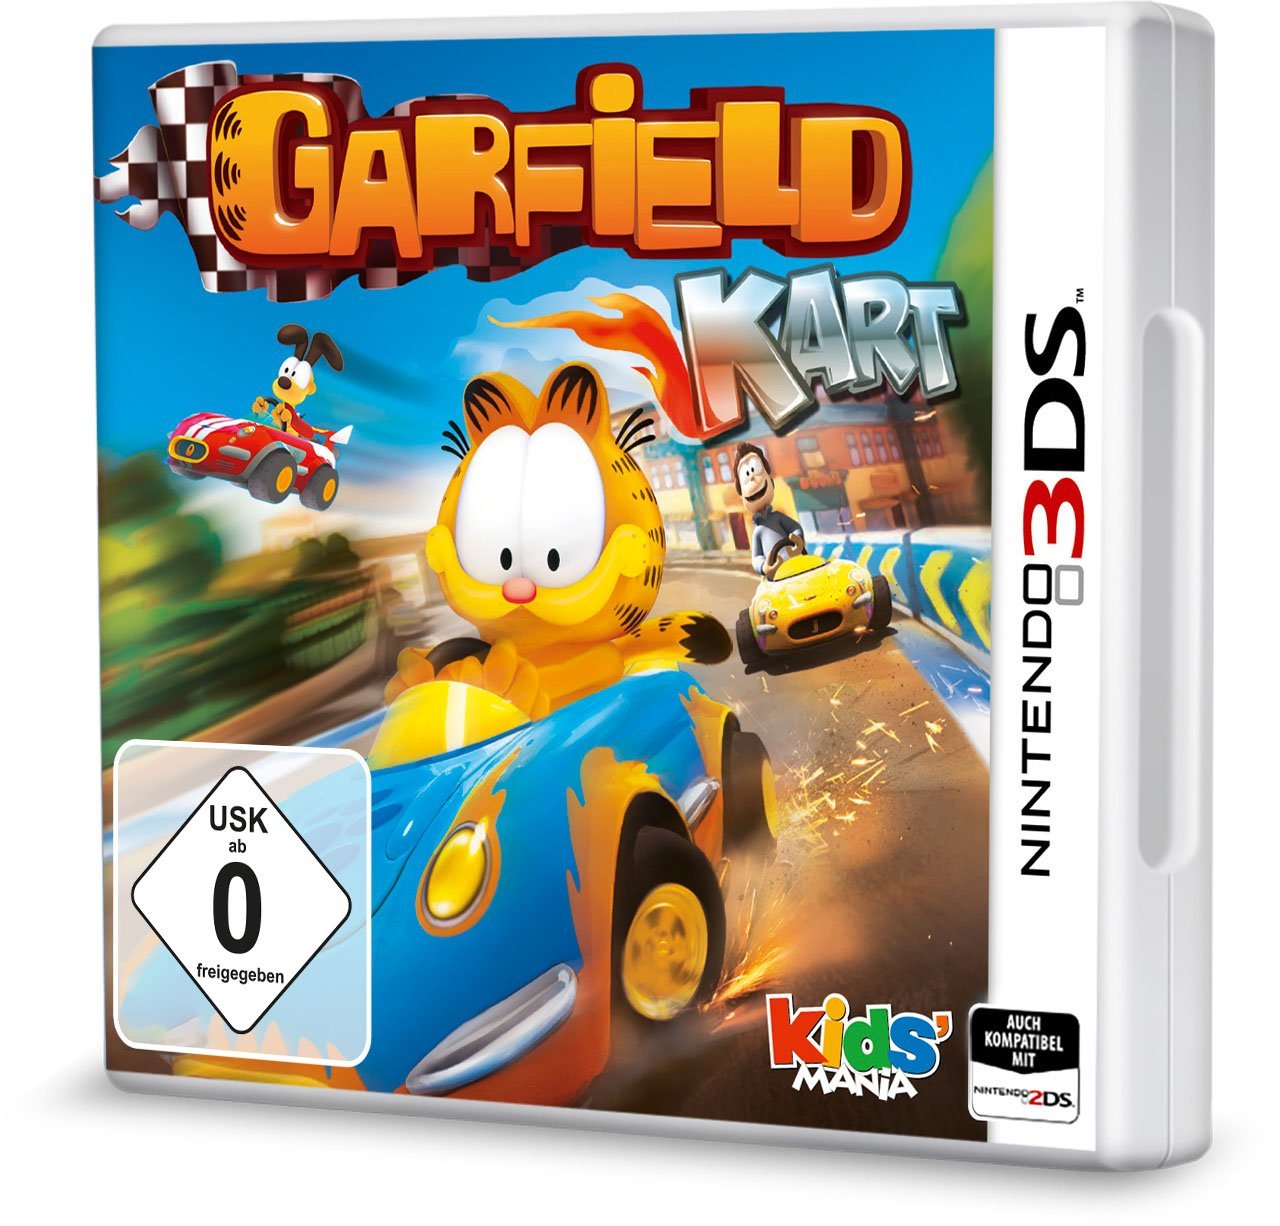 garfield-kart-game-for-3ds-heads-to-europe-in-june